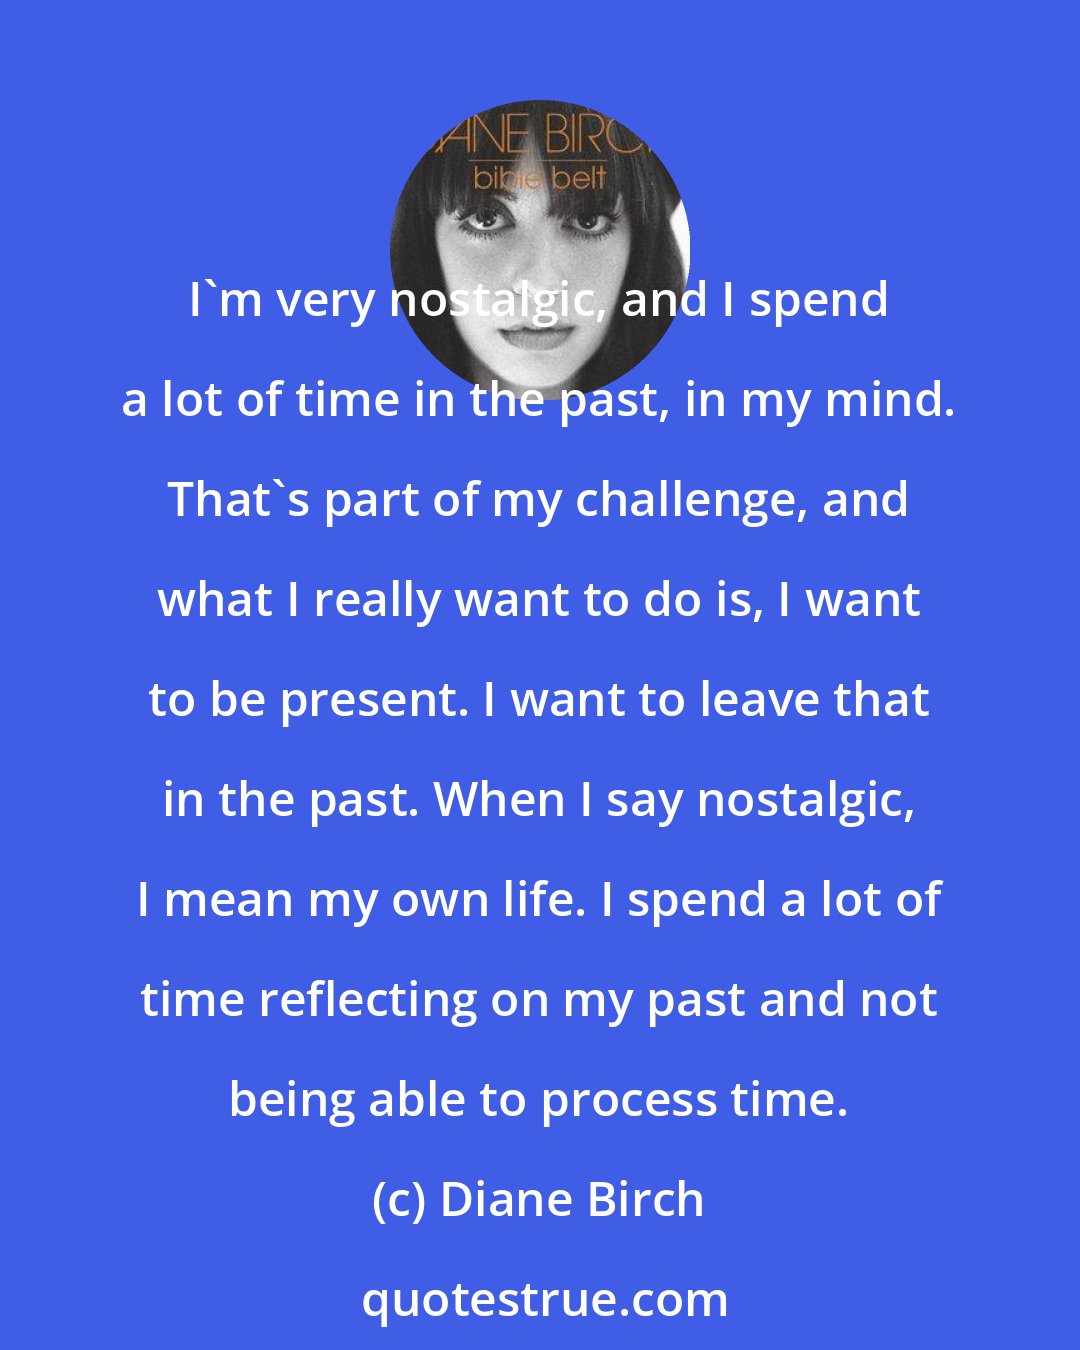 Diane Birch: I'm very nostalgic, and I spend a lot of time in the past, in my mind. That's part of my challenge, and what I really want to do is, I want to be present. I want to leave that in the past. When I say nostalgic, I mean my own life. I spend a lot of time reflecting on my past and not being able to process time.